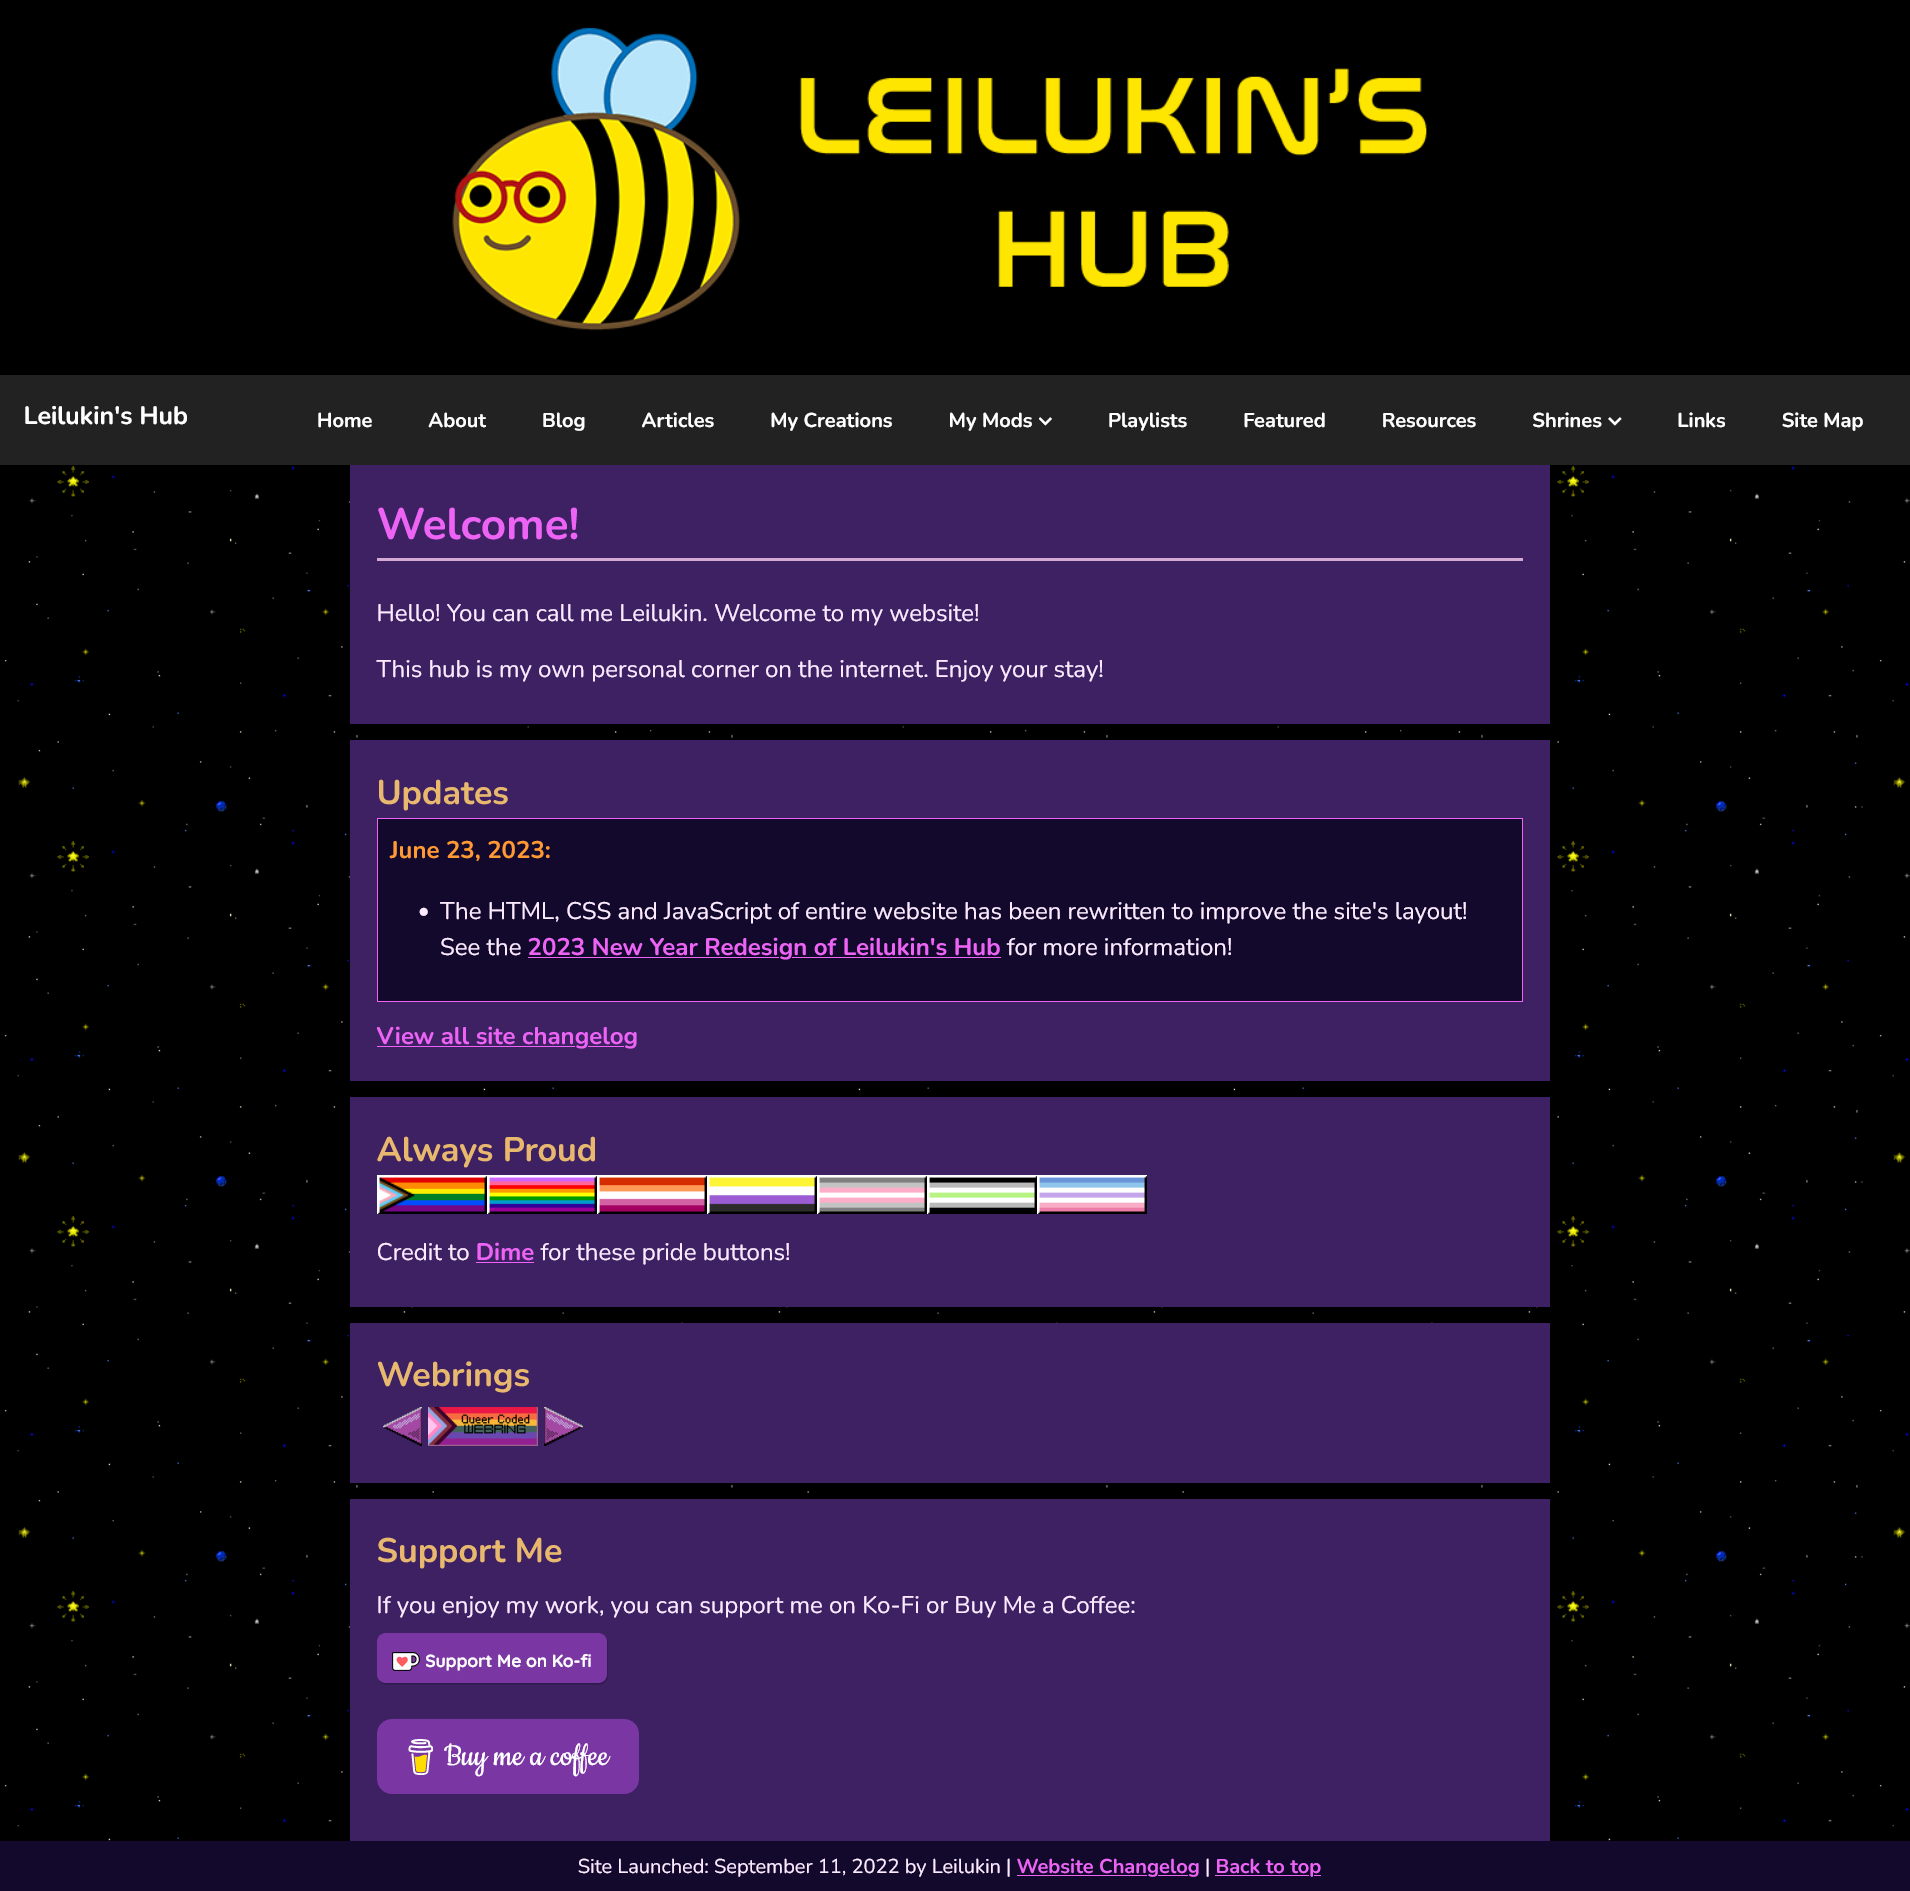 A screenshot of Leilukin's Hub home page, with its new layout released on June 23, 2023